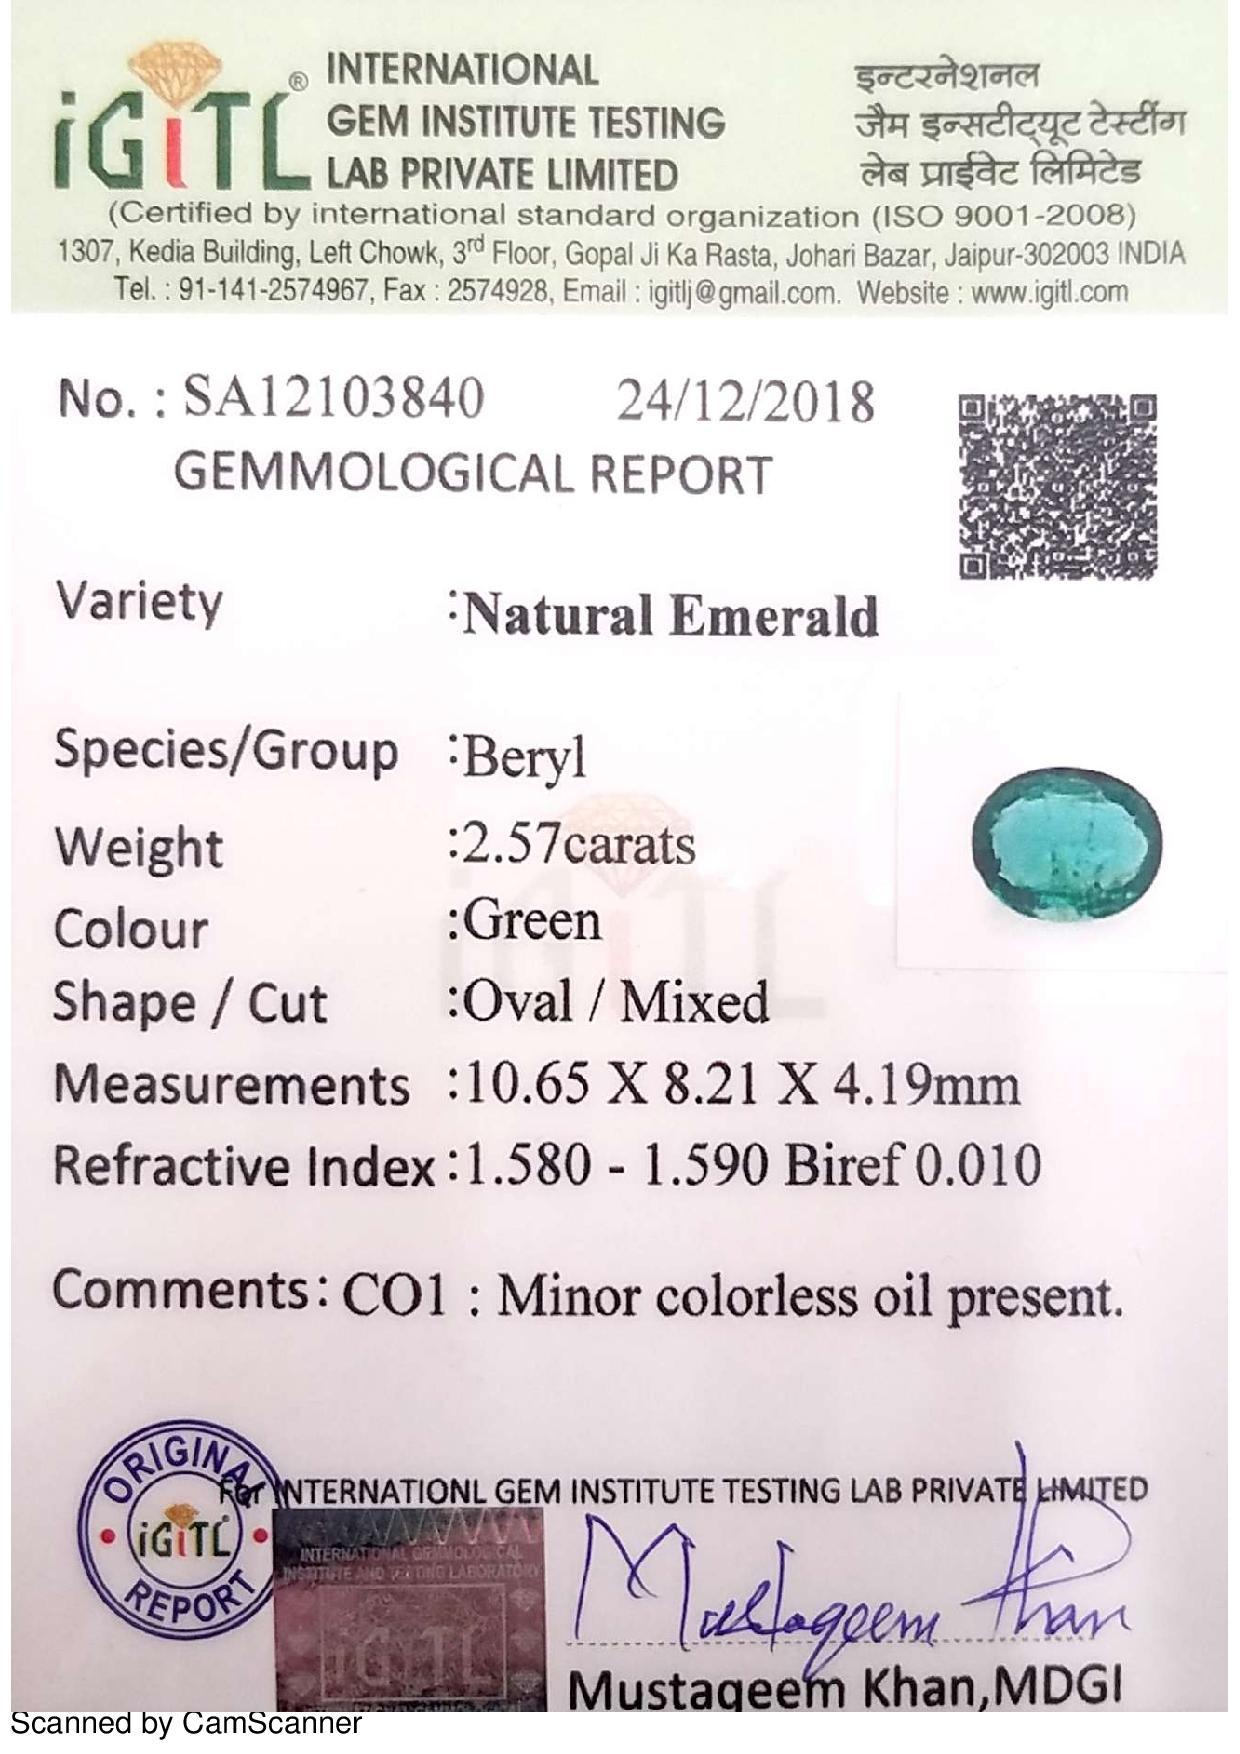 Oval Cut 2.57 Ct Weight Oval Shaped Green Color IGITL Certified Emerald Gemstone Pendant For Sale